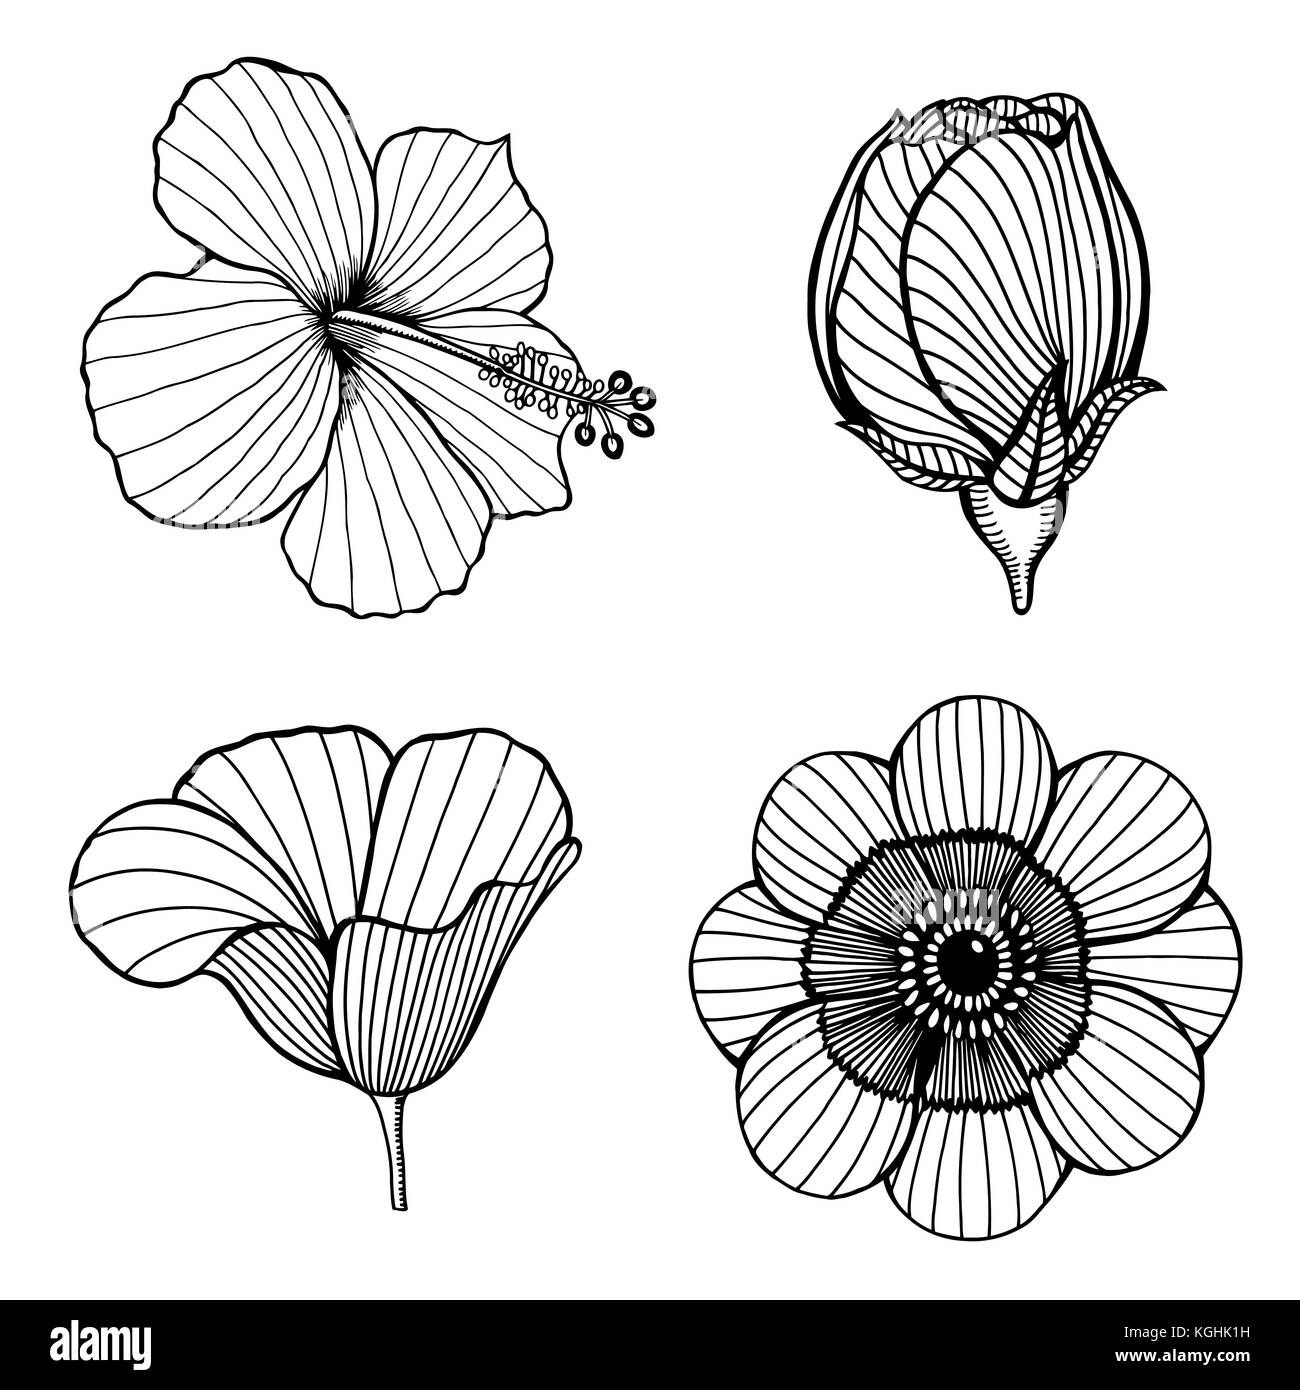 Vector set of hand drawn lotus flowers. Sketch floral botany collection in graphic black and white style Stock Vector